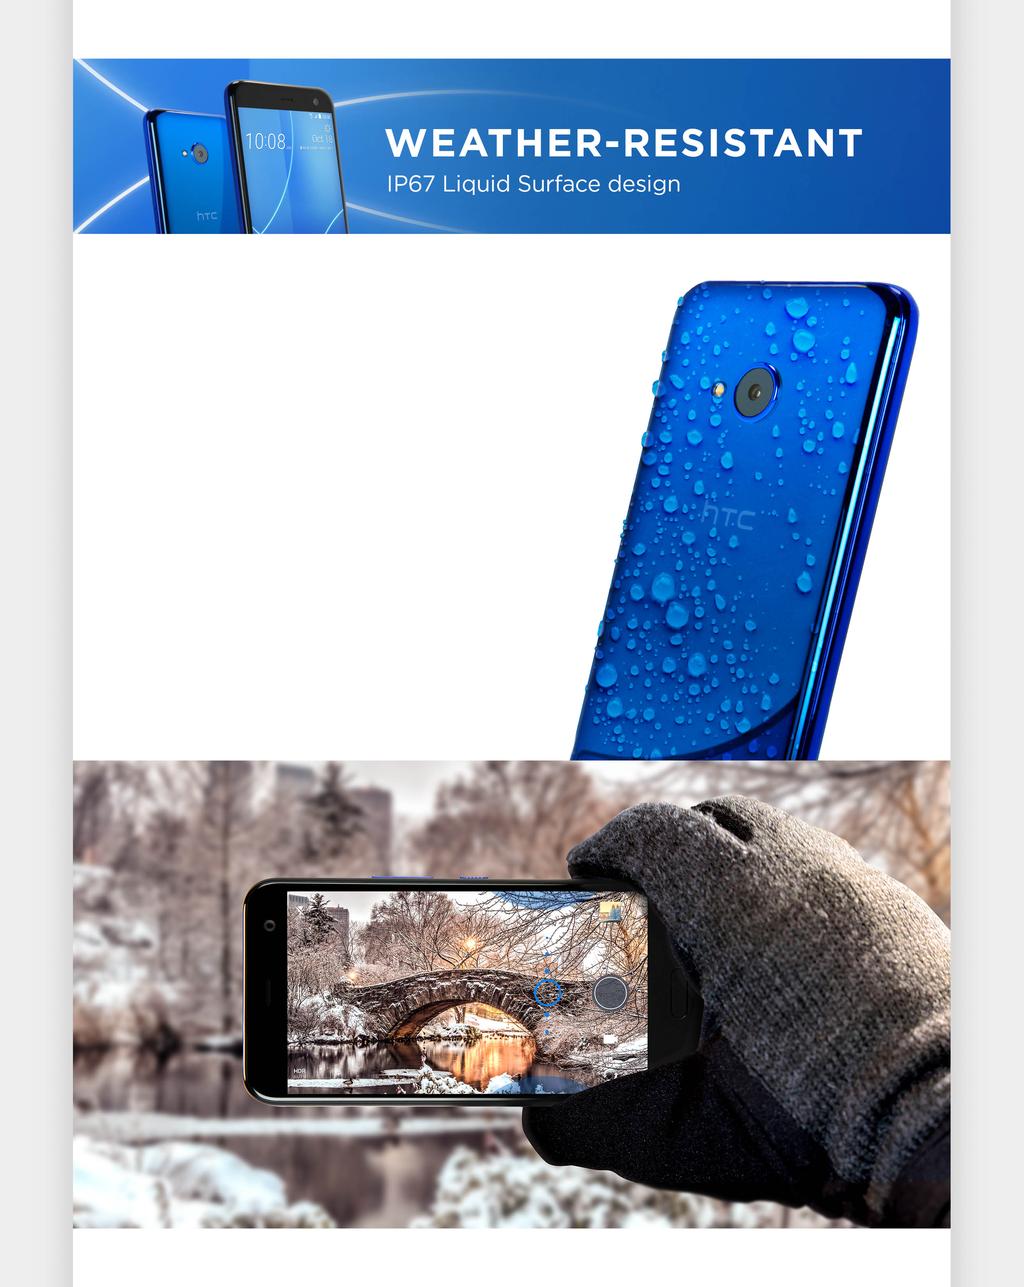 Weather-resistant liquid surface design The HTC U11 life s design is a continuation of our liquid surface design philosophy.